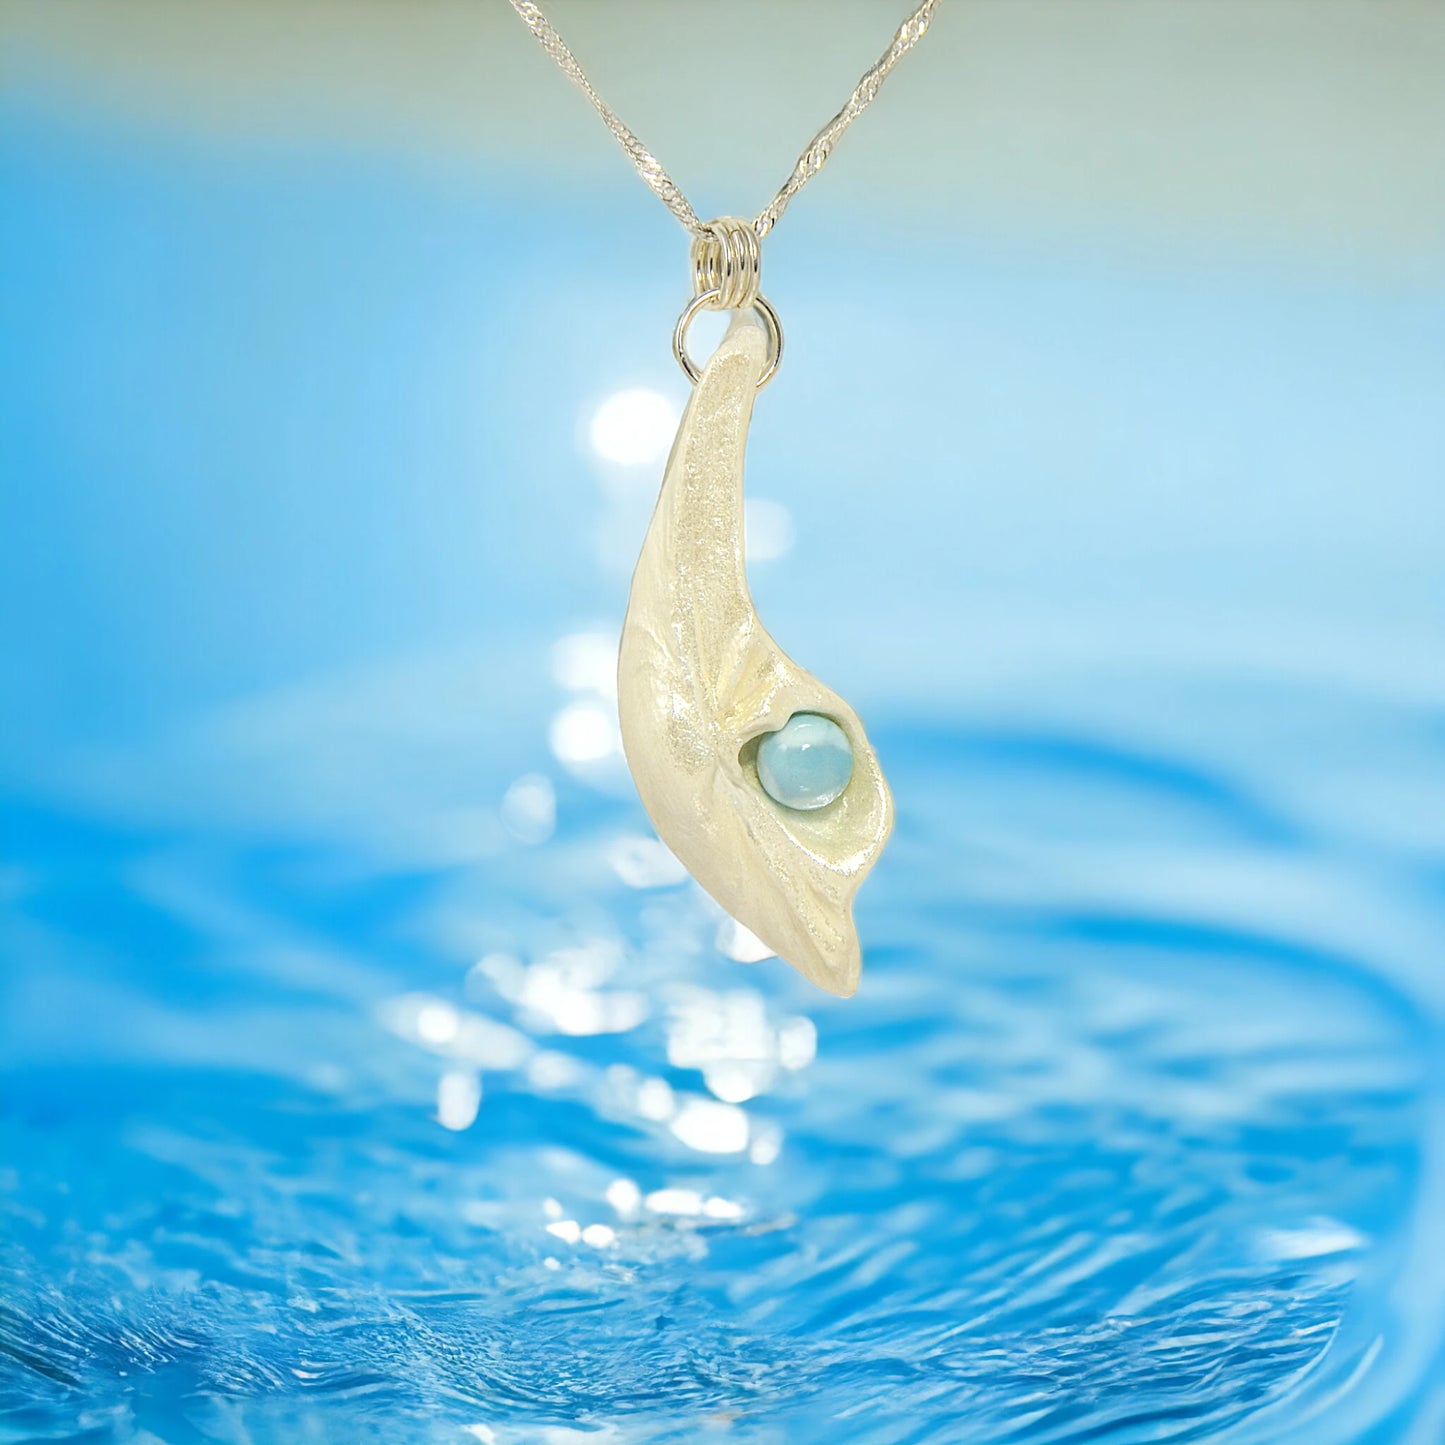 Larimar Moon Natural seashell a beautiful 10 mm Round Larimar Gemstone compliments the pendant. The pendant is shown hanging over a sunlight body of water.